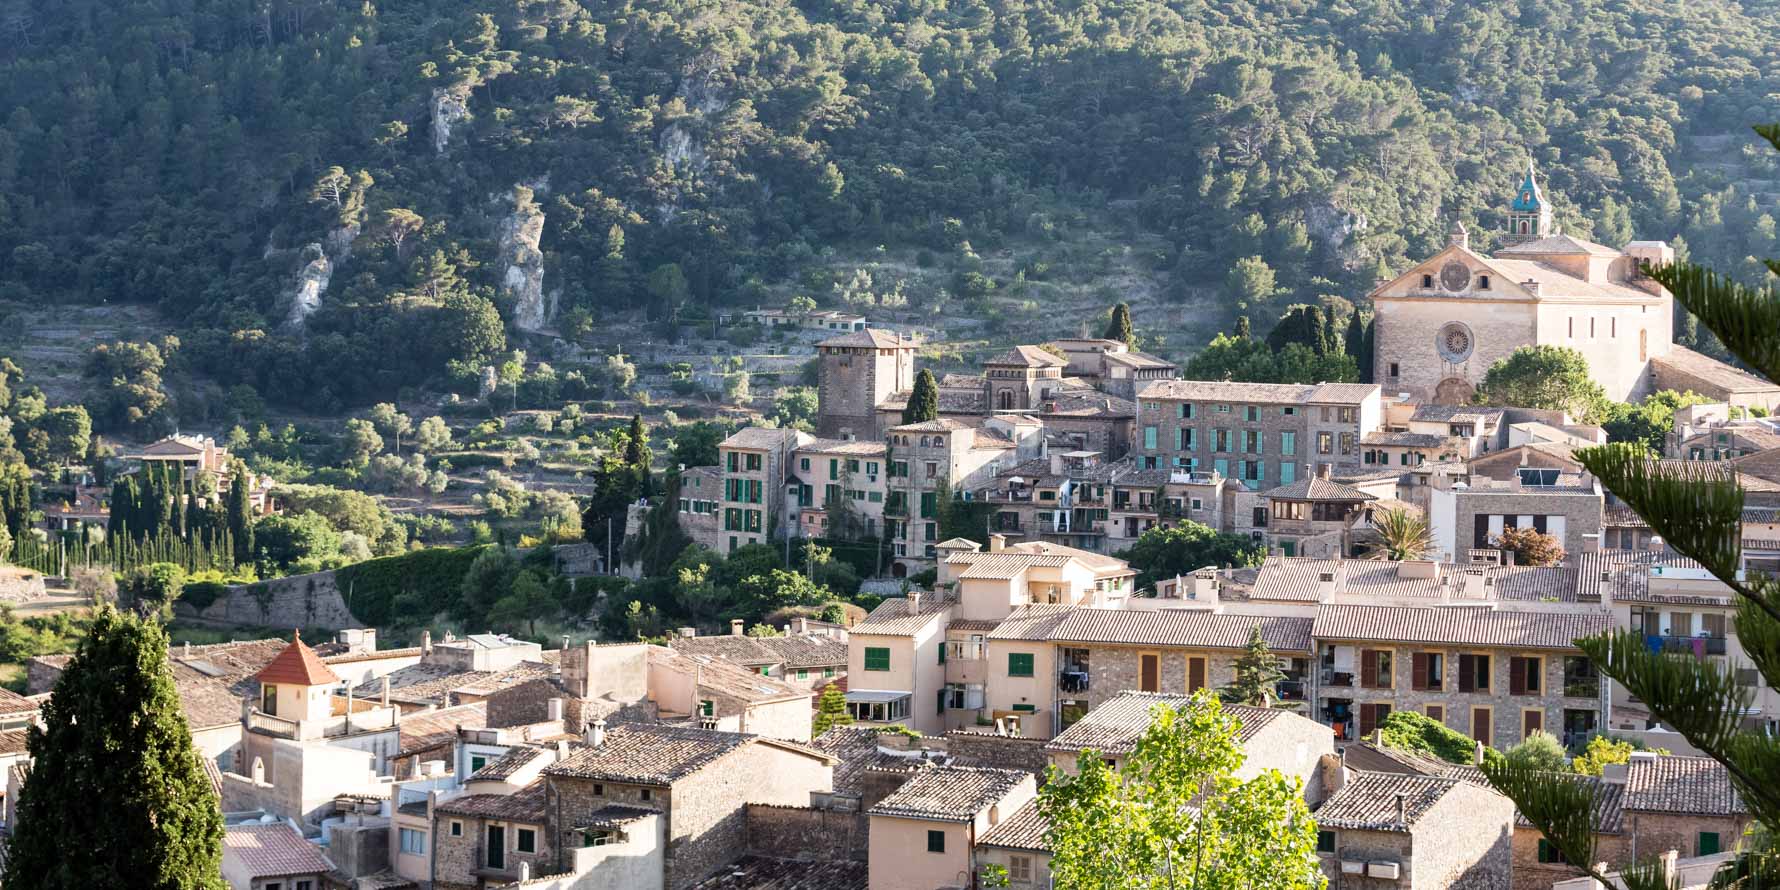 View over Valldemossa with the Valldemossa Hotel on the left and La Cartuja on the right side